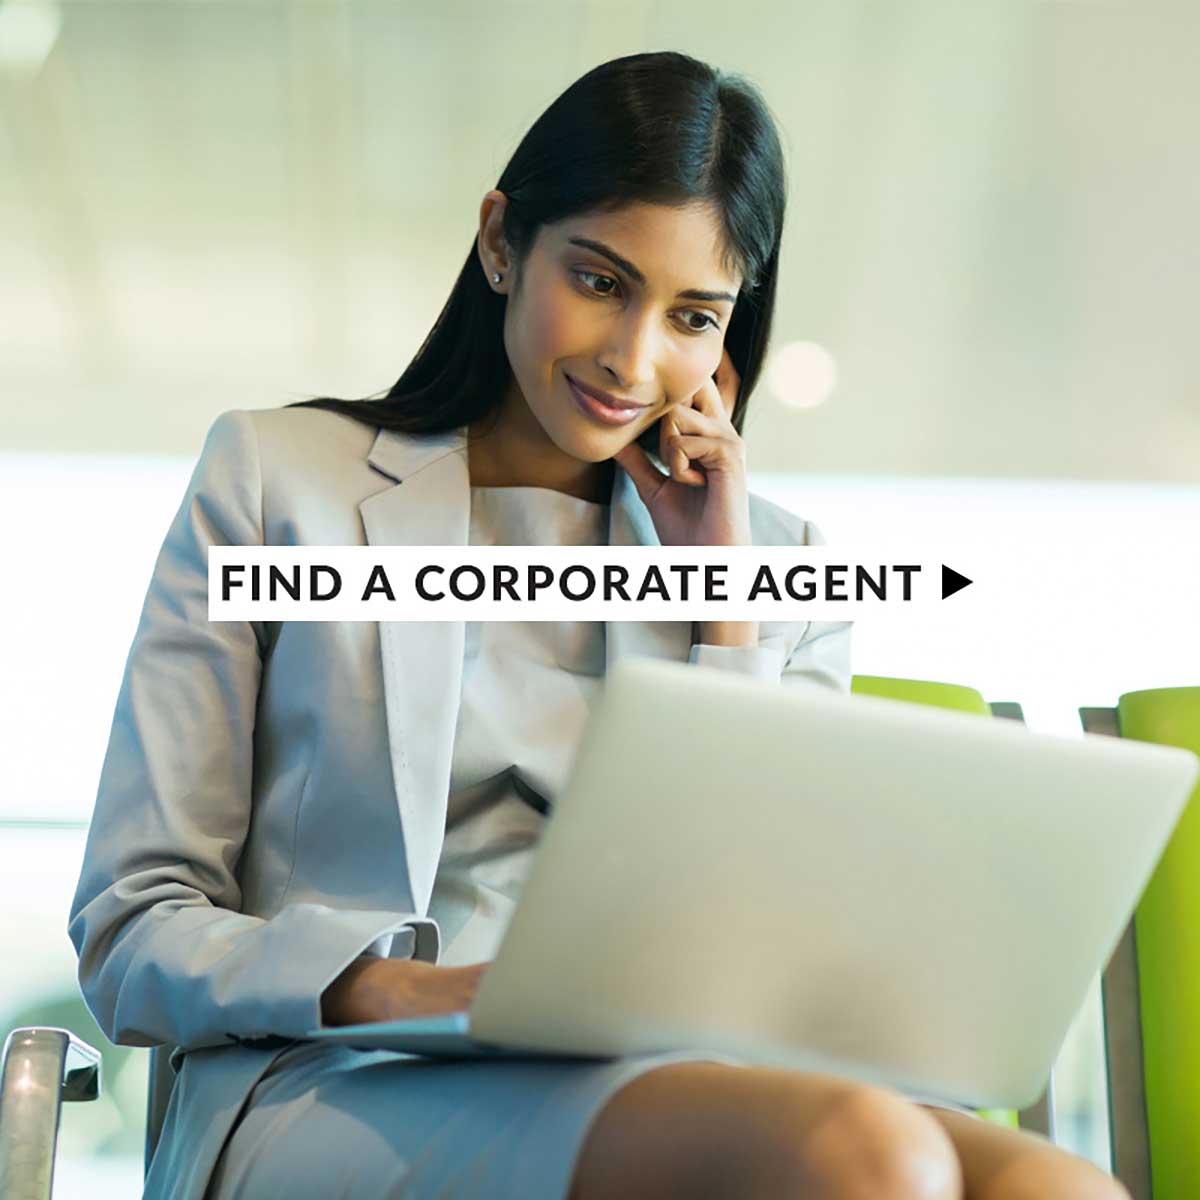 Find a Corporate Agent